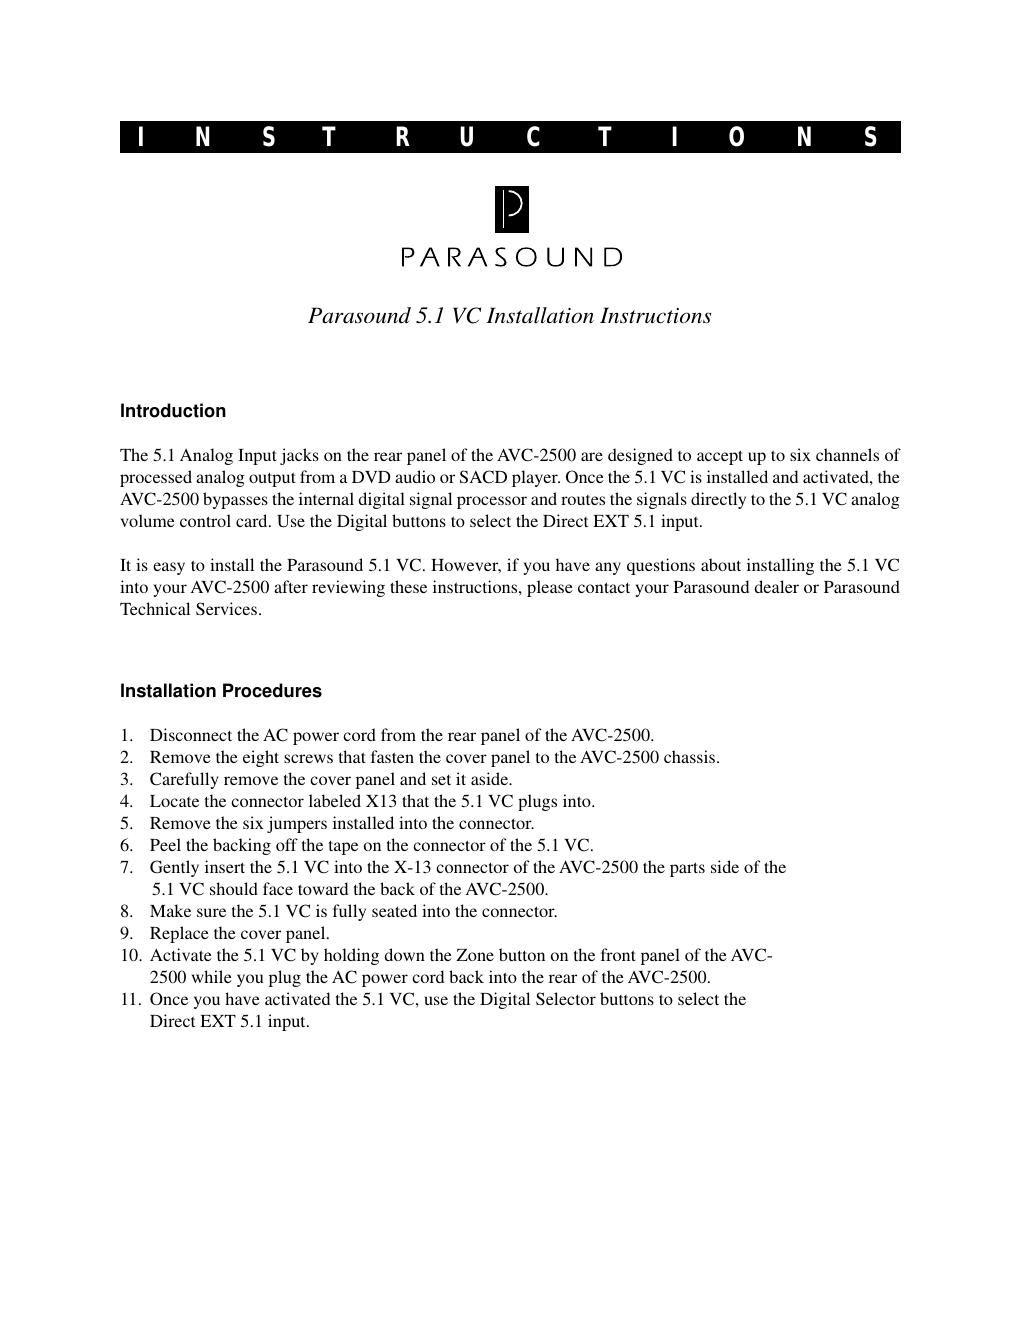 parasound 5 1 vc owners manual